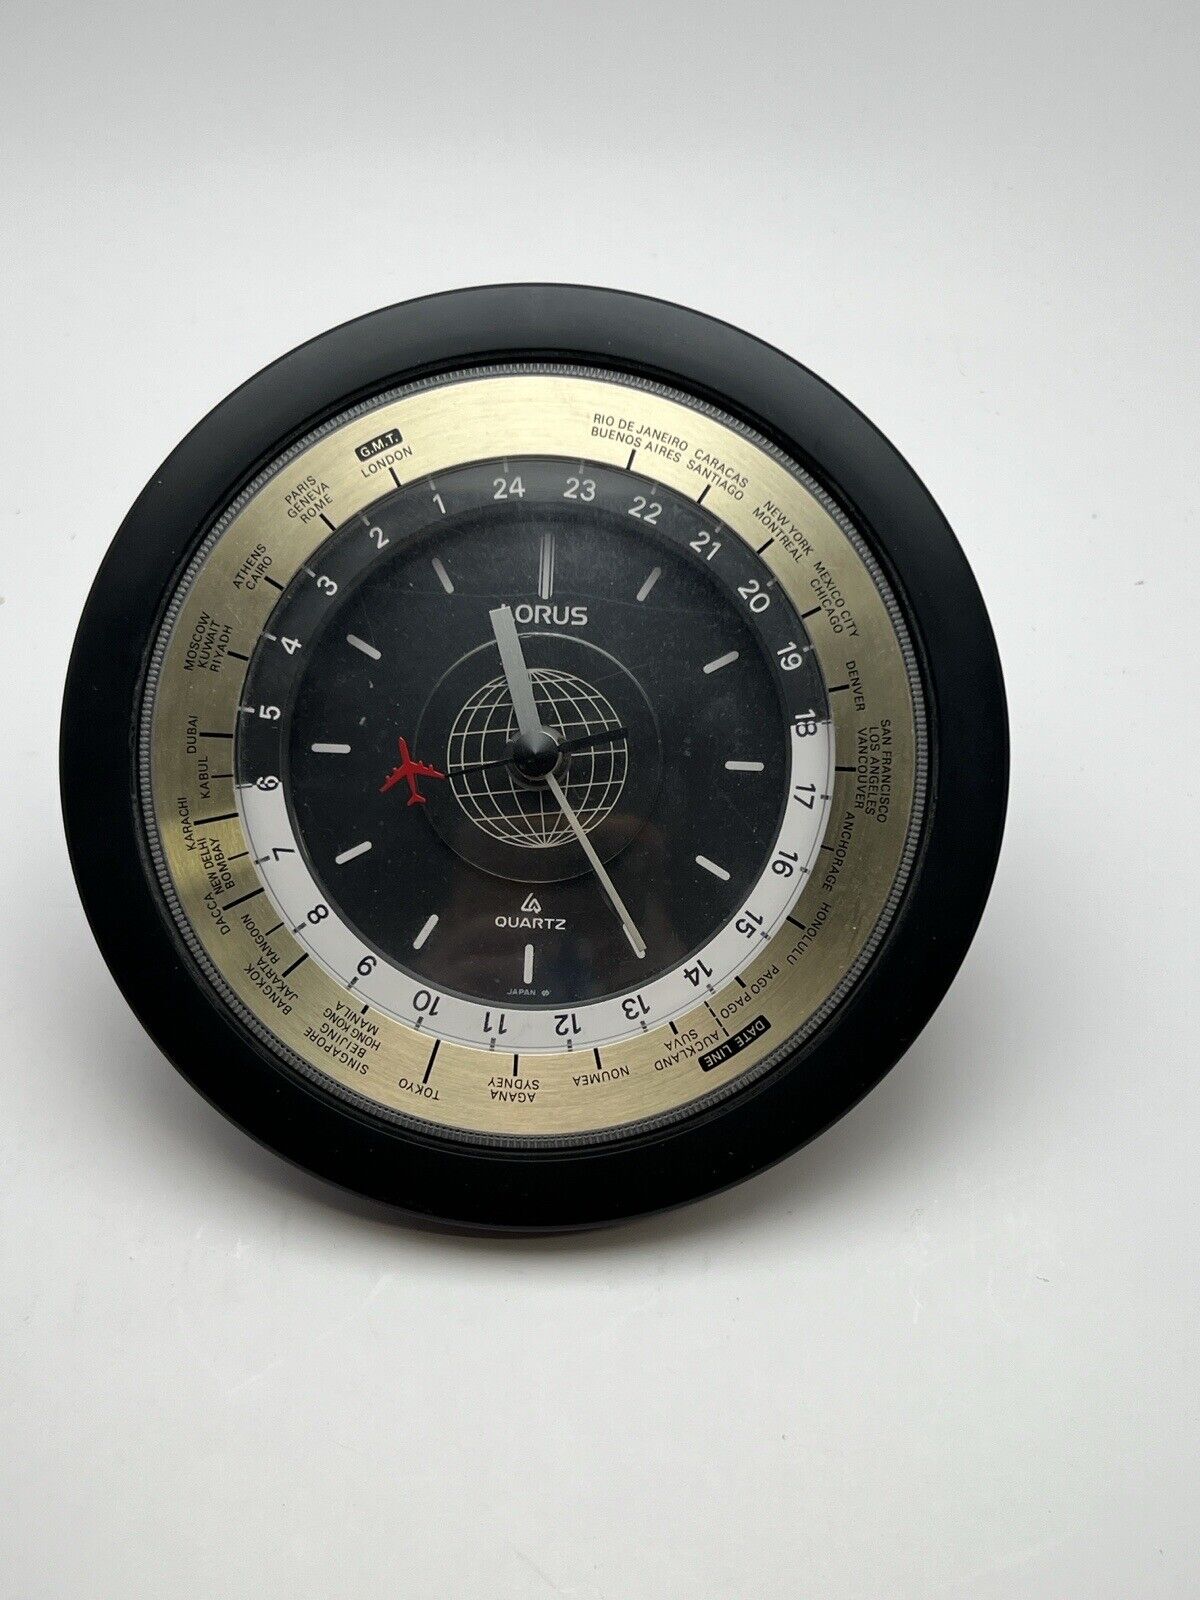 Vintage Lorus World Time Clock W/ Airplane Second Hand Made In Japan See Video